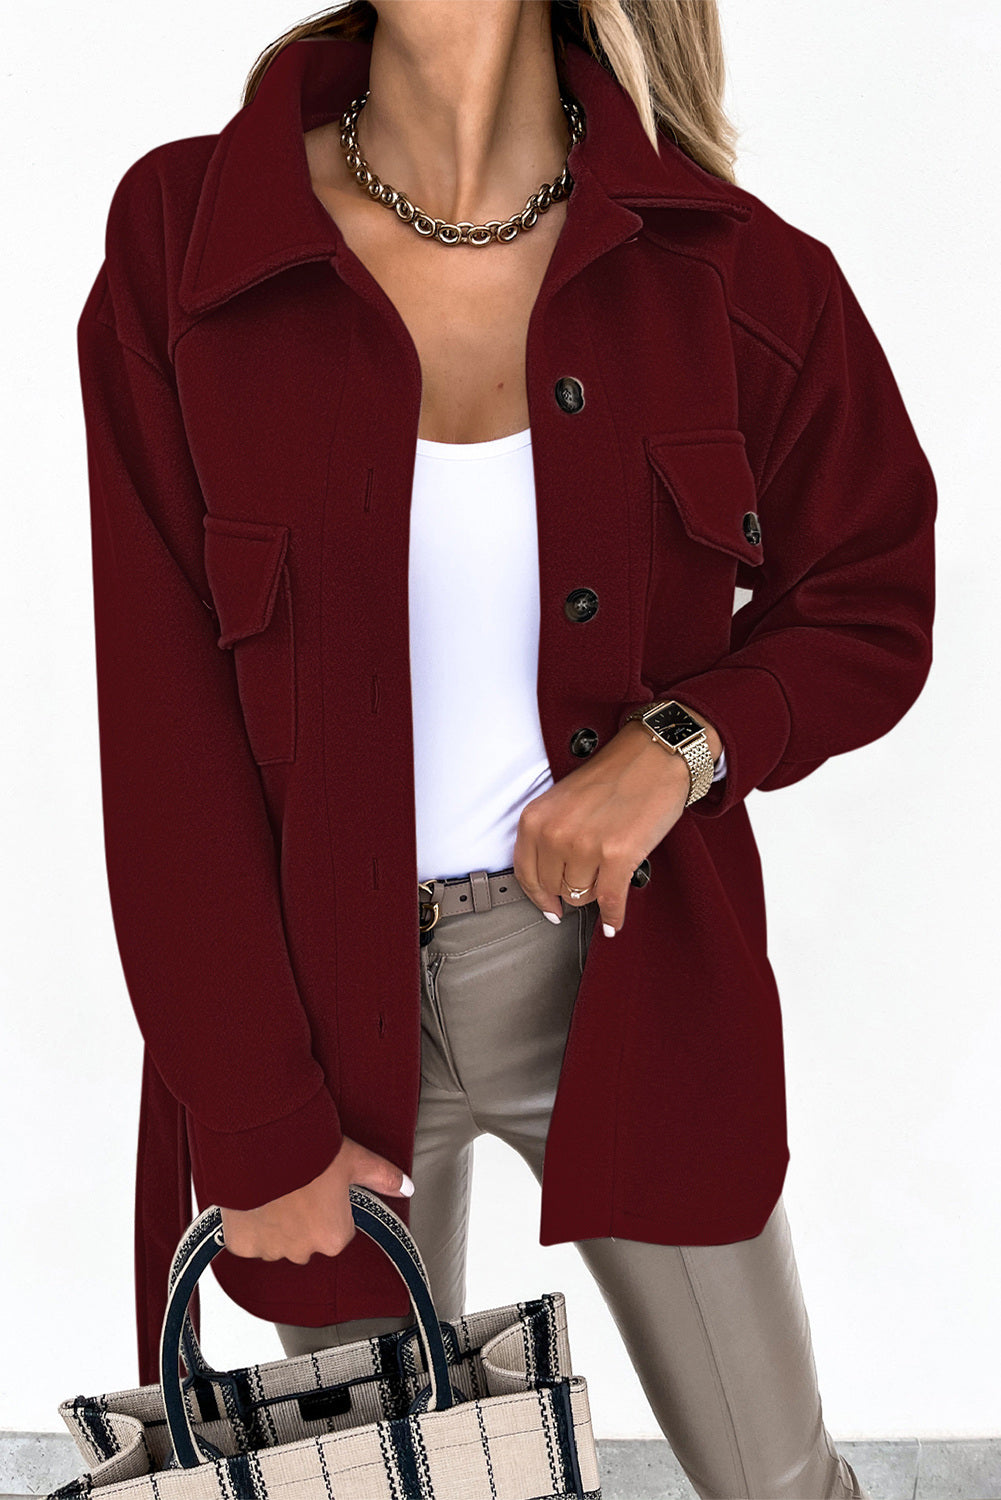 Red Women's Lapel Button Down Coat Winter Belted Coat with Pockets LC8511359-3